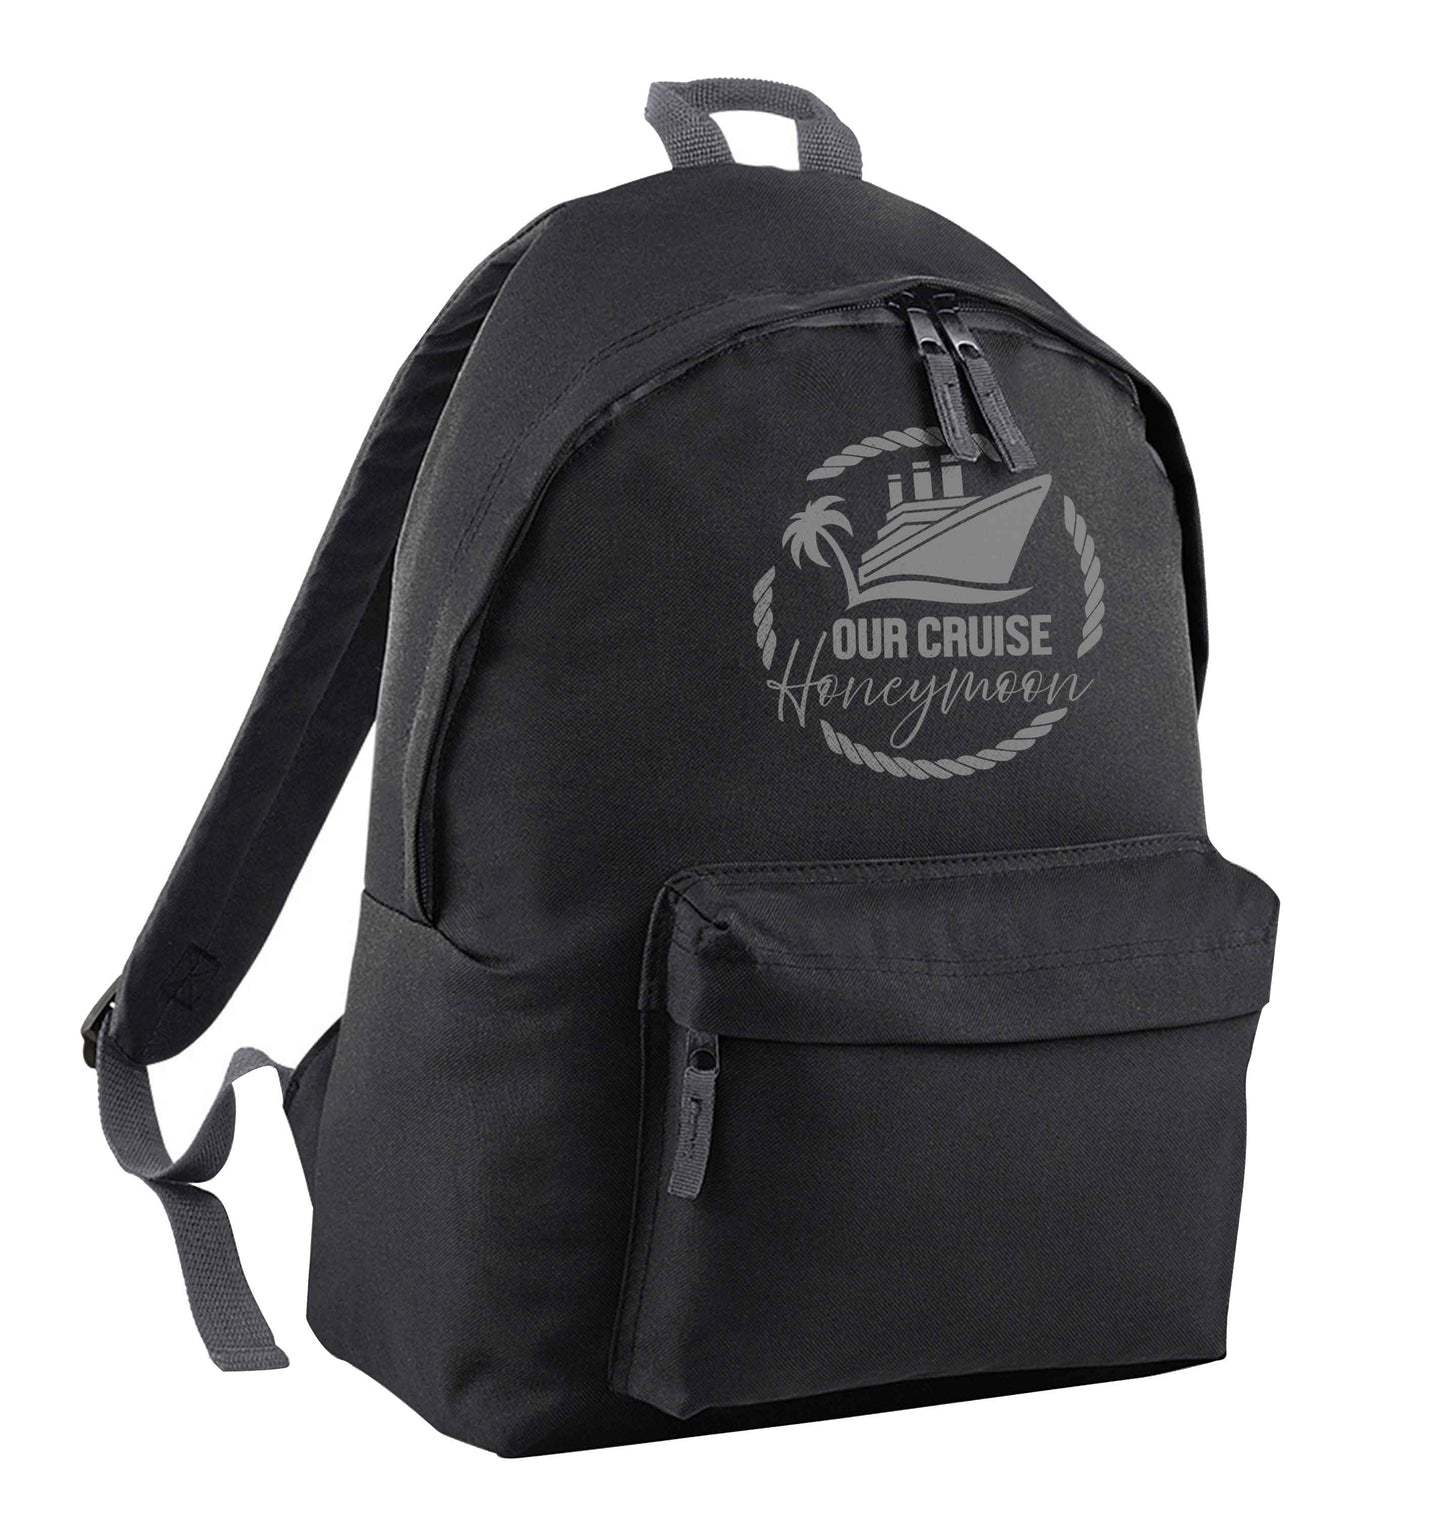 Our cruise honeymoon black adults backpack